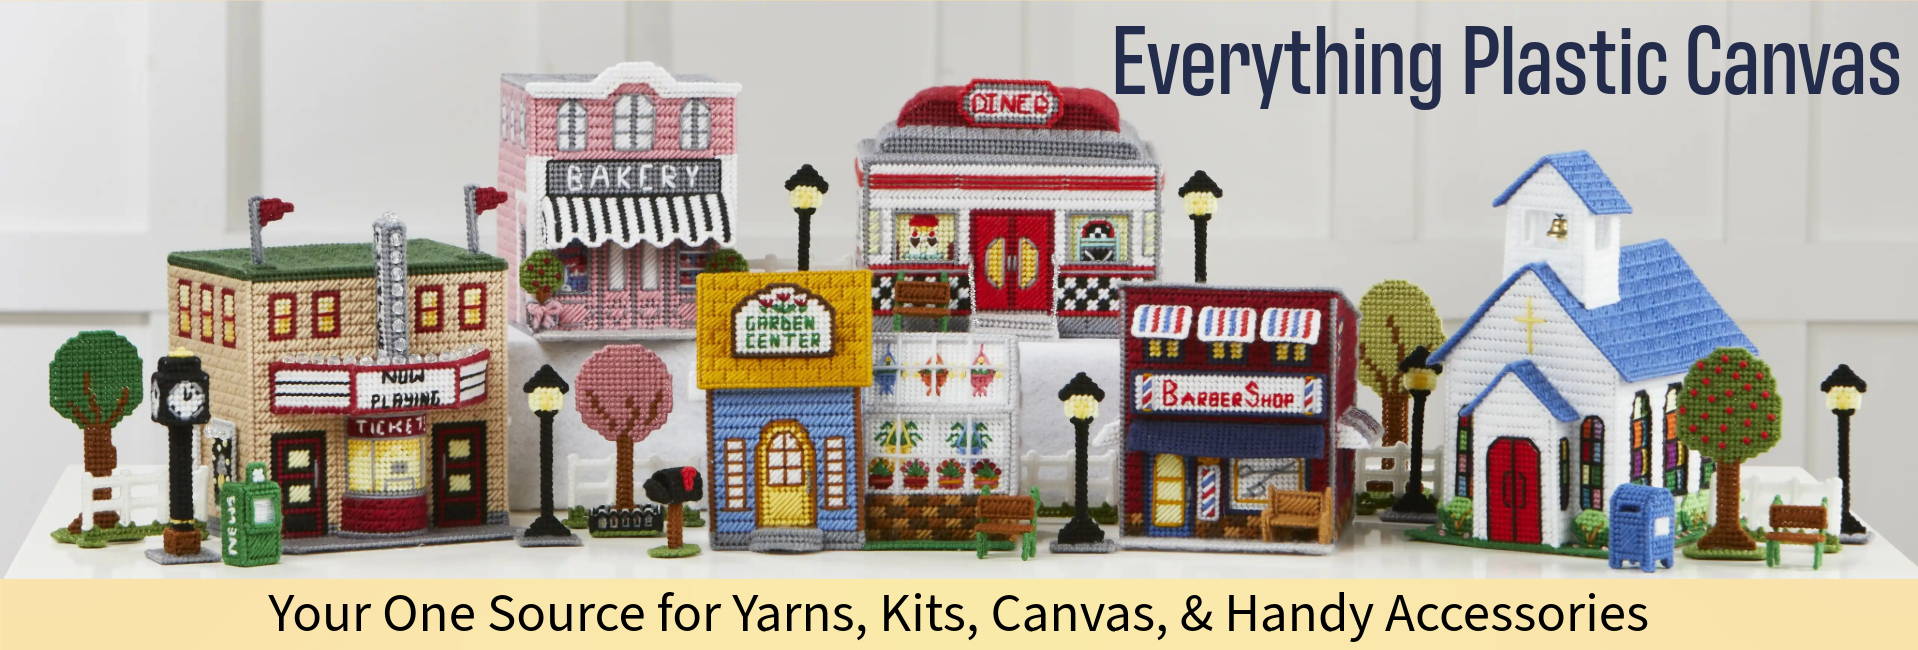 Your Source for Everything Plastic Canvas. Image: Herrchners Plastic Canvas Village Kit.